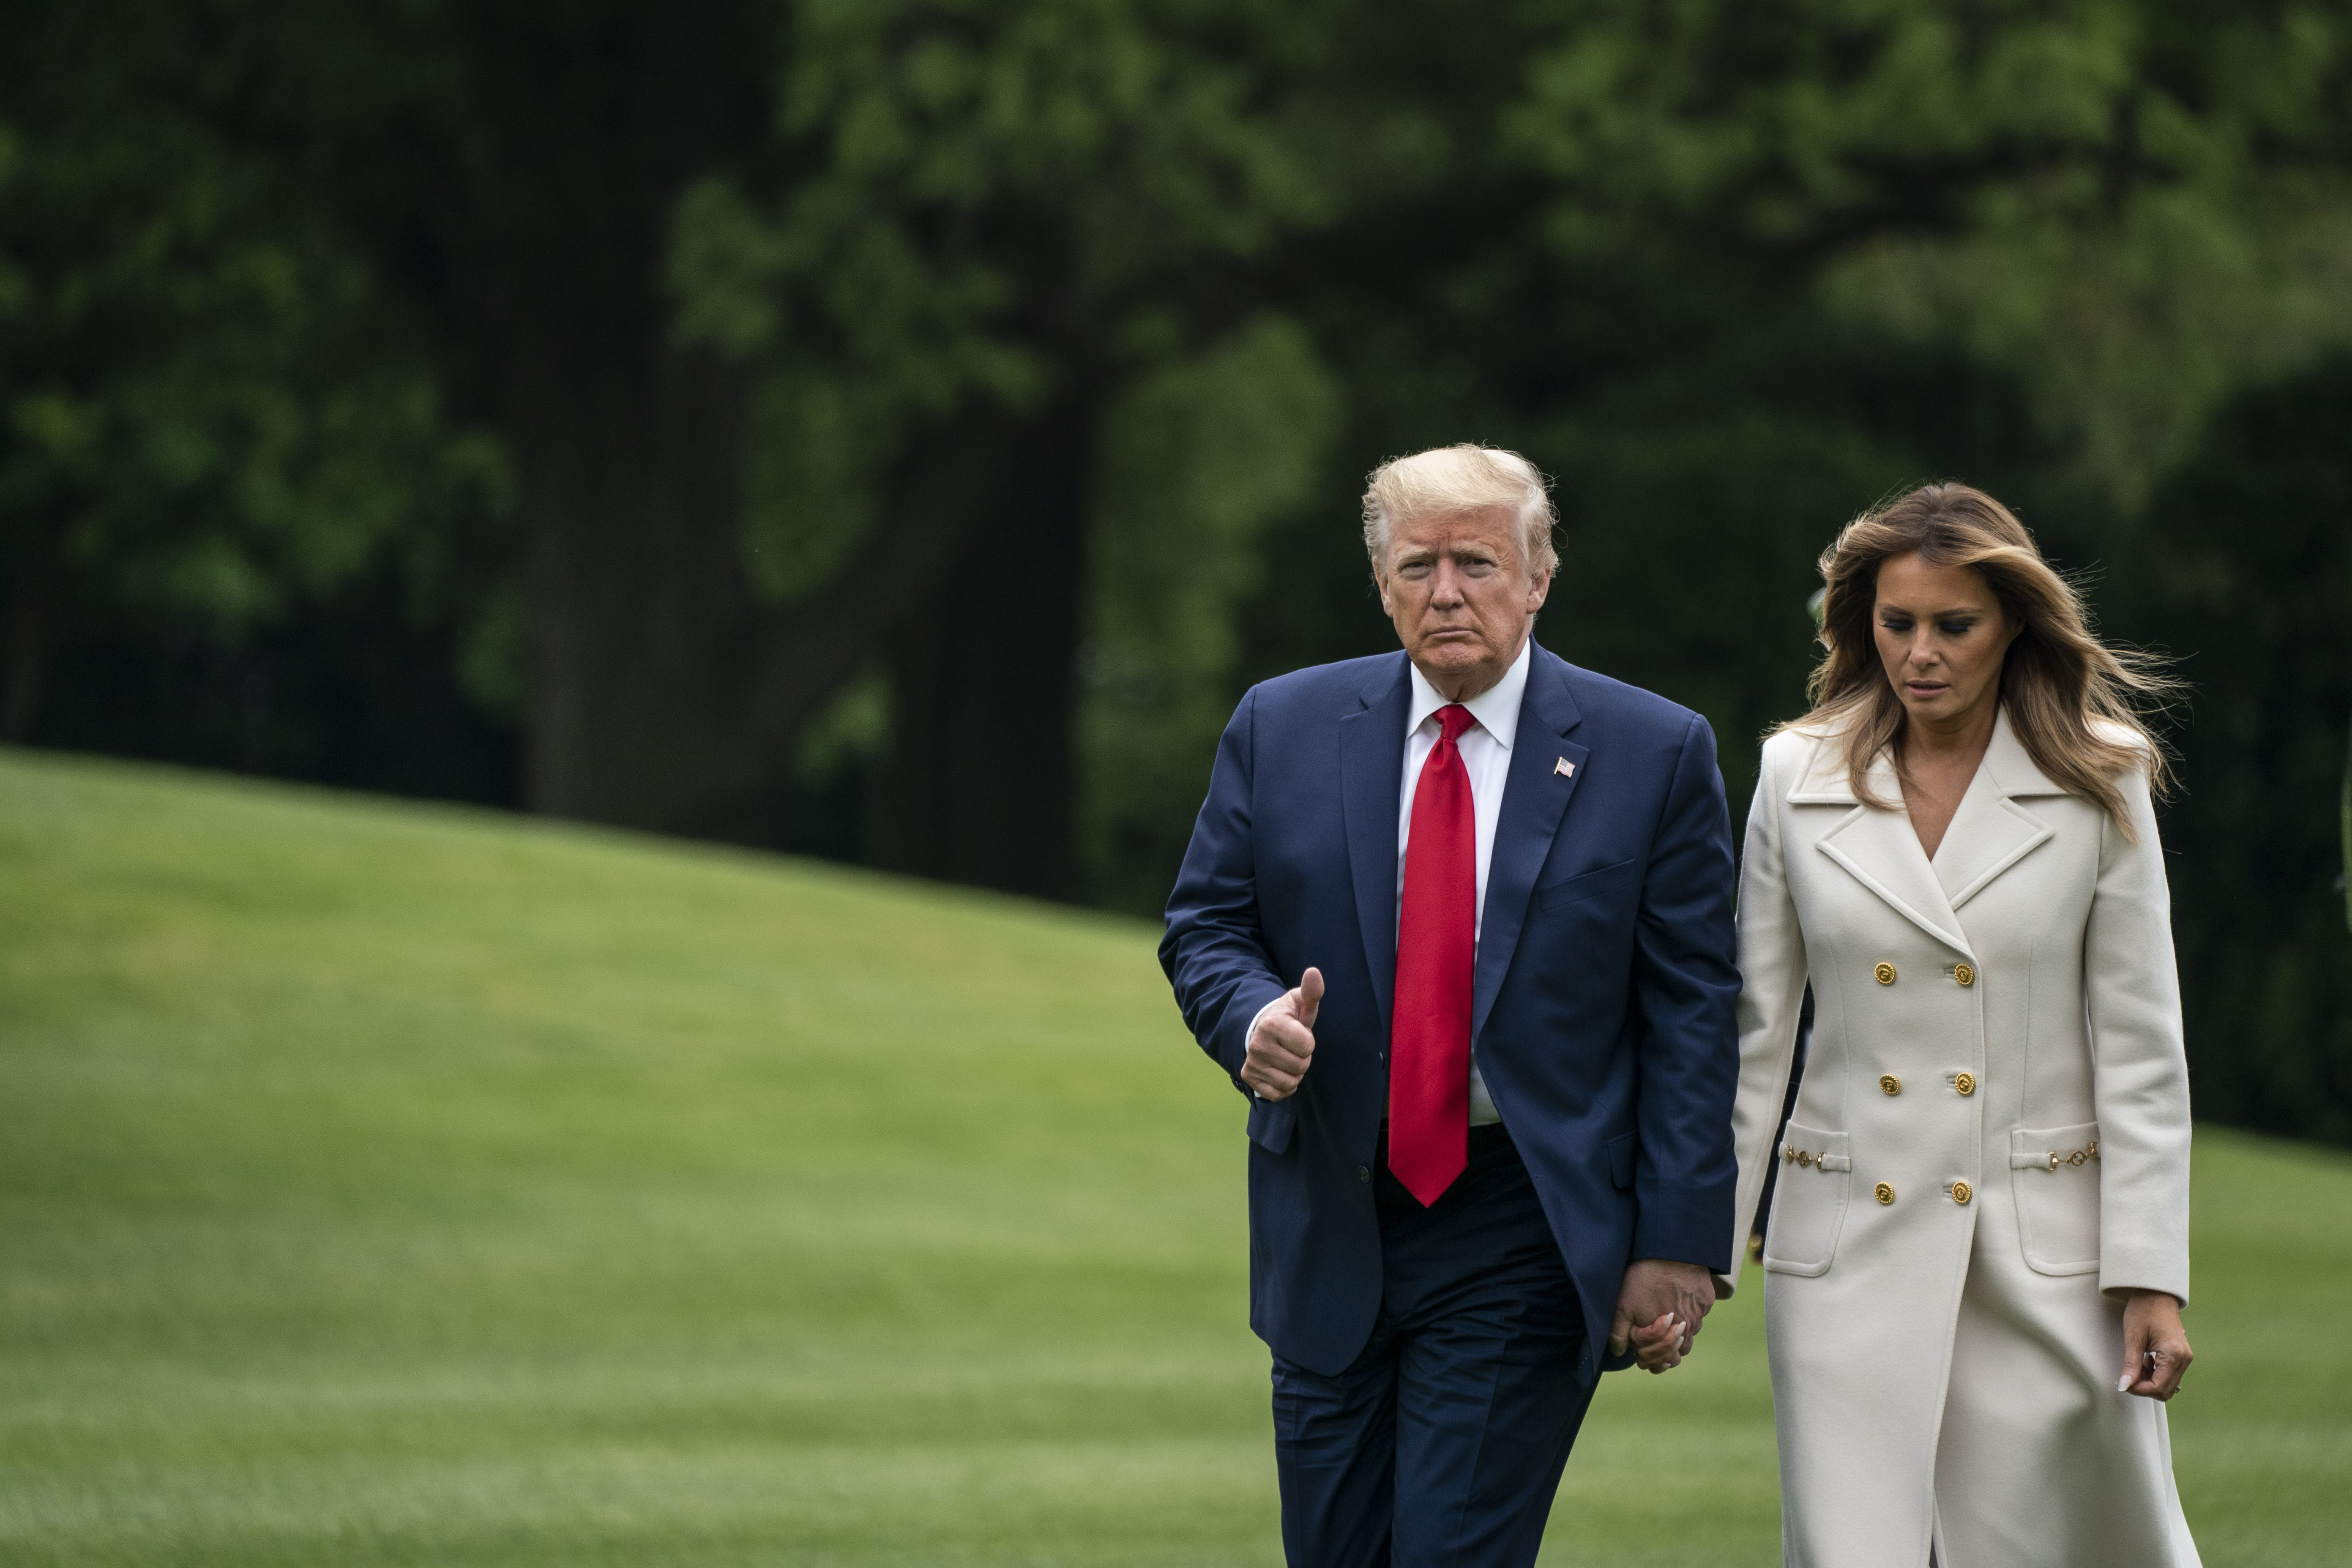 WASHINGTON, DC - MAY 25: U.S. President Donald Trump and first lady Melania Trump arrive to the South Lawn of the White House after a trip to Baltimore, Maryland on May 25, 2020 in Washington, DC. The Trumps attended a Memorial Day ceremony at the Fort McHenry National Monument and Historic Shrine despite objections by Baltimore Mayor Bernard C. Jack Young, whose residents remain under a stay-at-home order due to the coronavirus. (Photo by Sarah Silbiger/Getty Images)